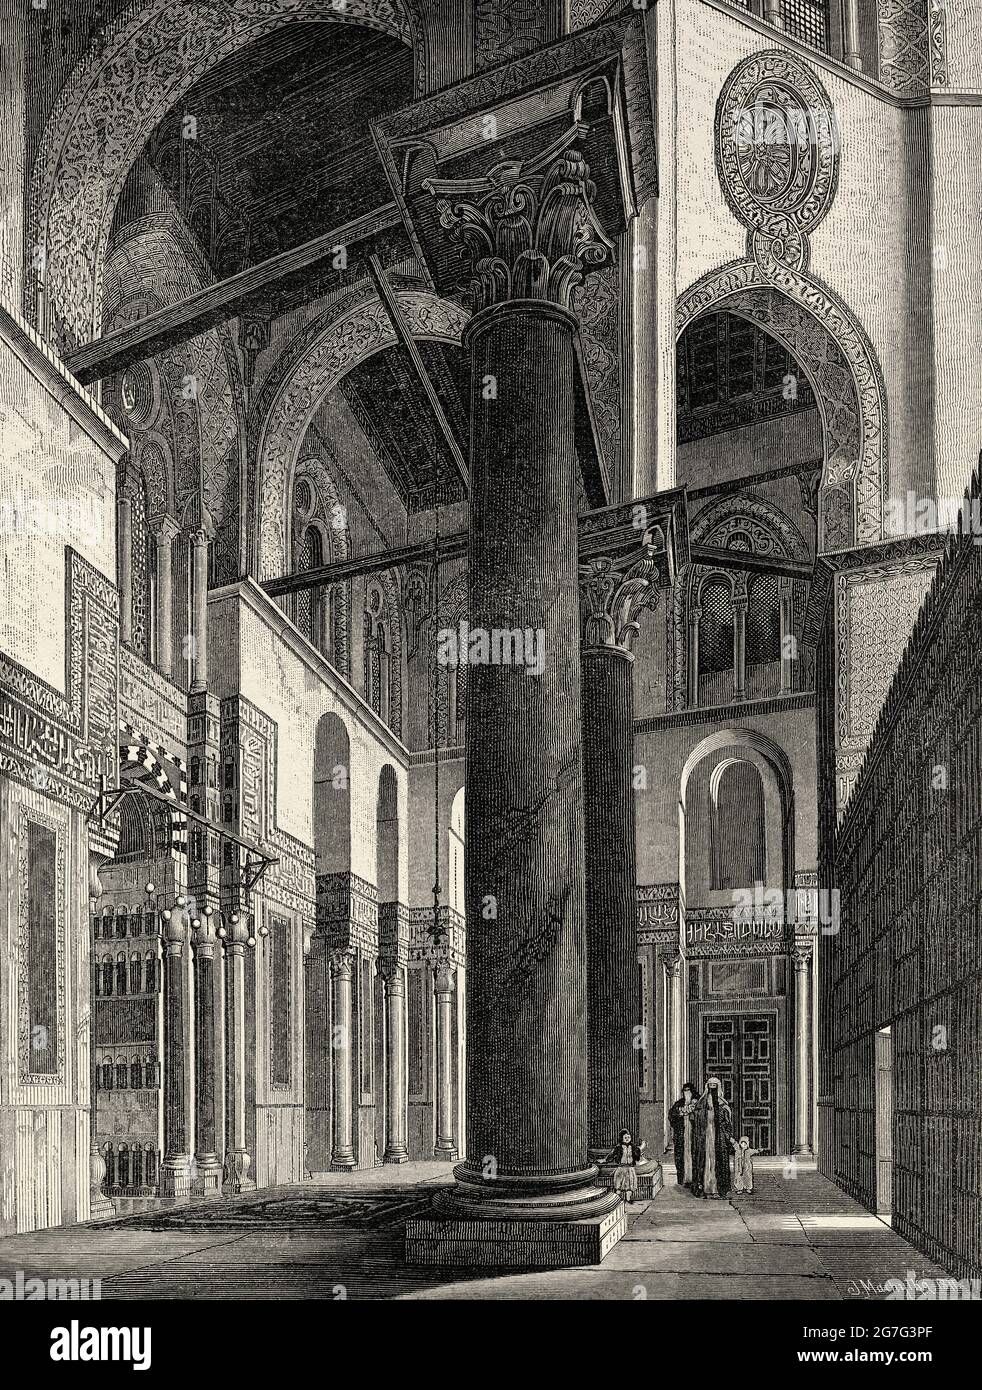 Mamluk architecture. Interior of the Mosque of Sultan Mohammed Ibn Qalawun, Cairo City. Egypt, North Africa. Old 19th century engraved illustration from El Mundo Ilustrado 1880 Stock Photo